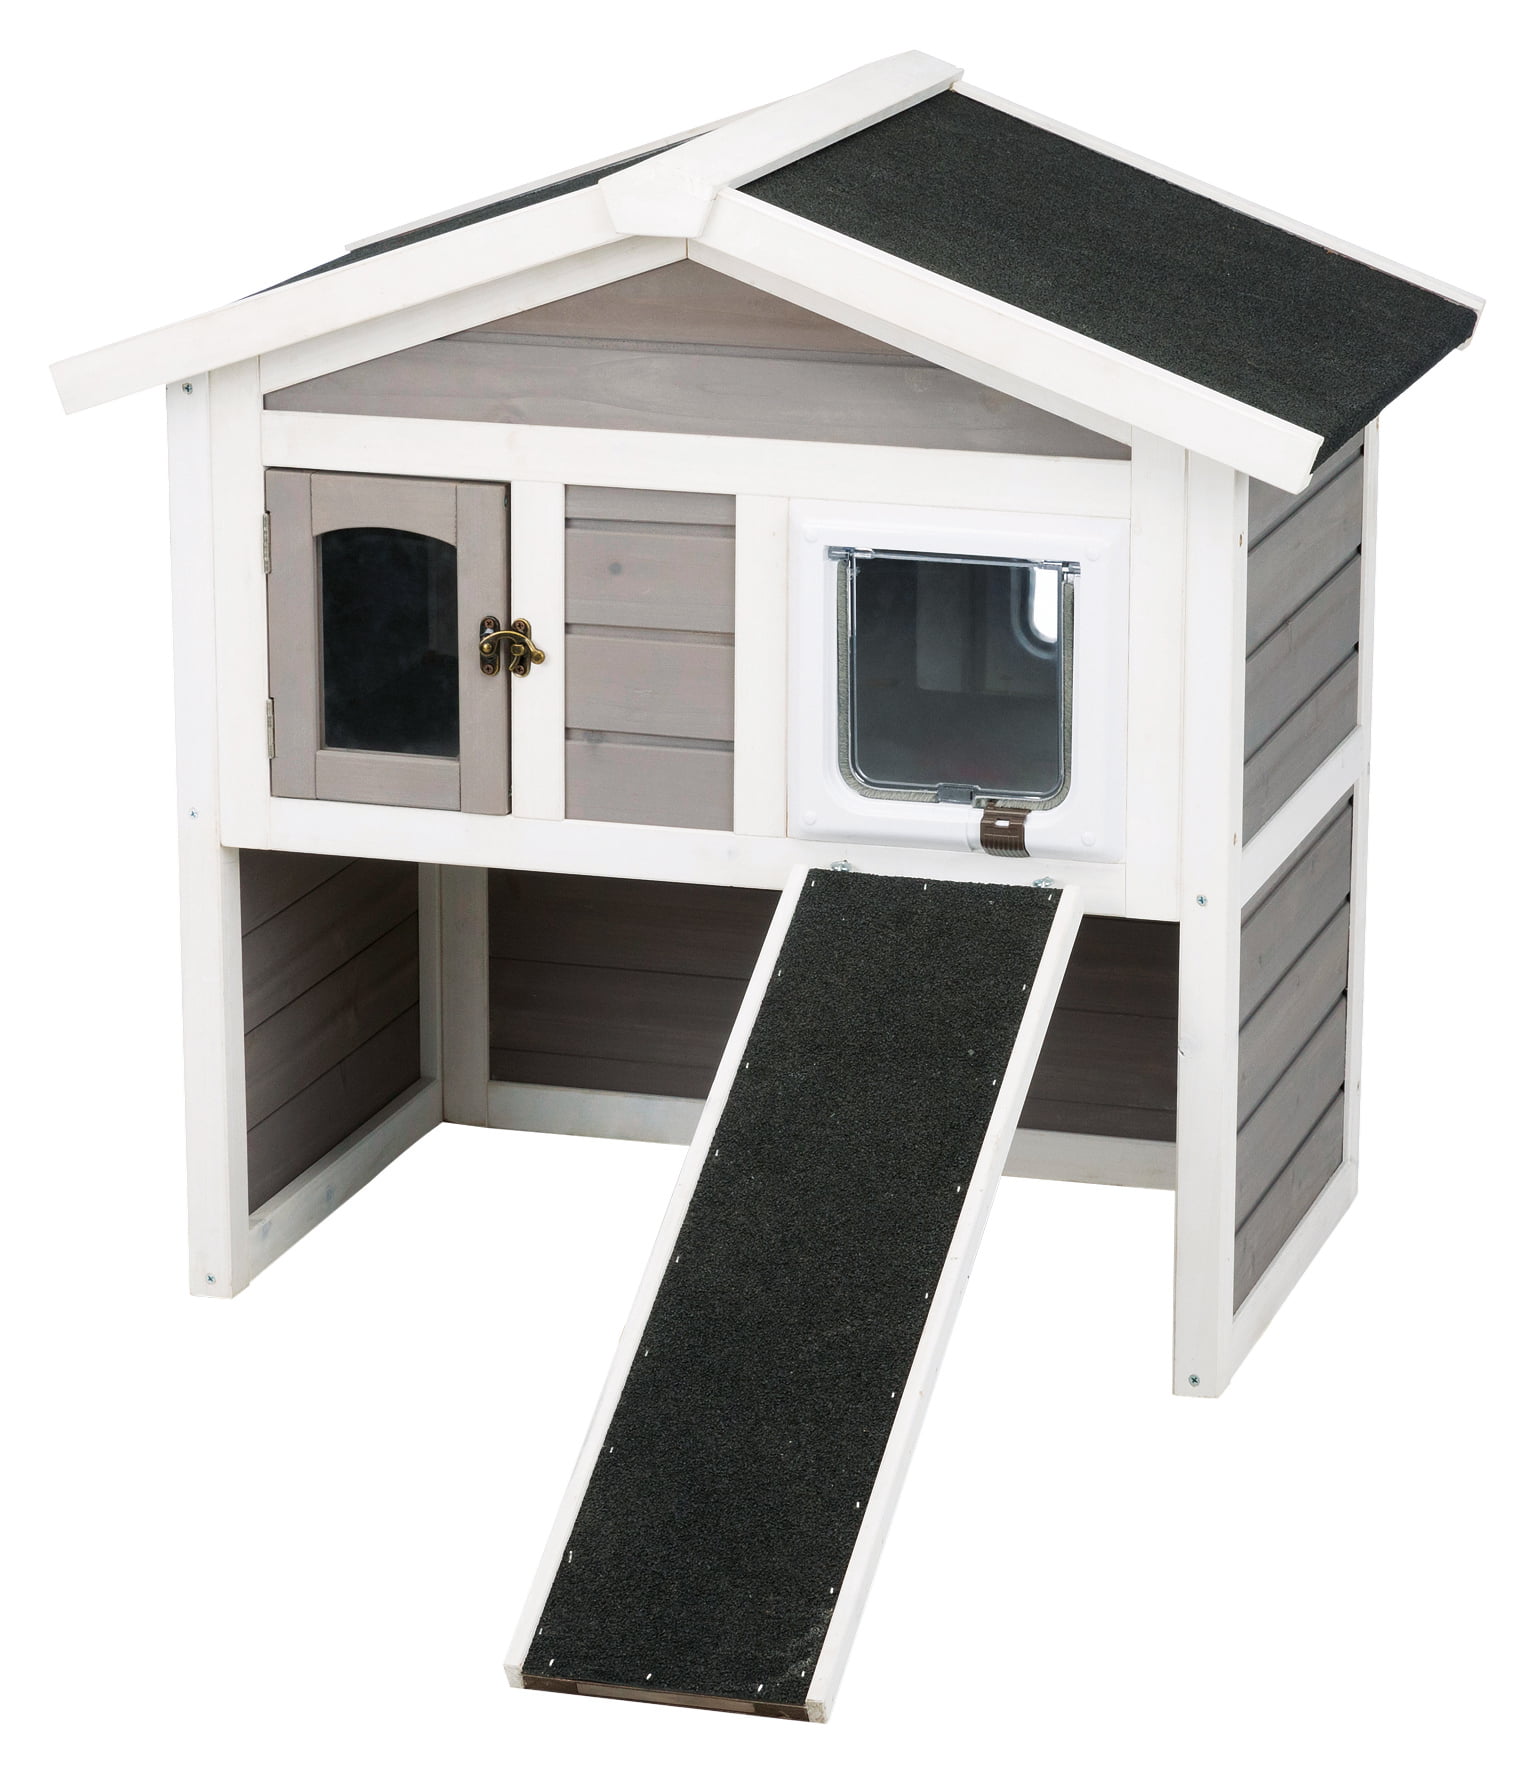 Trixie Pet  Products 2 Story Cottage Outdoor Cat  House  Gray 30 in Walmart com Walmart com